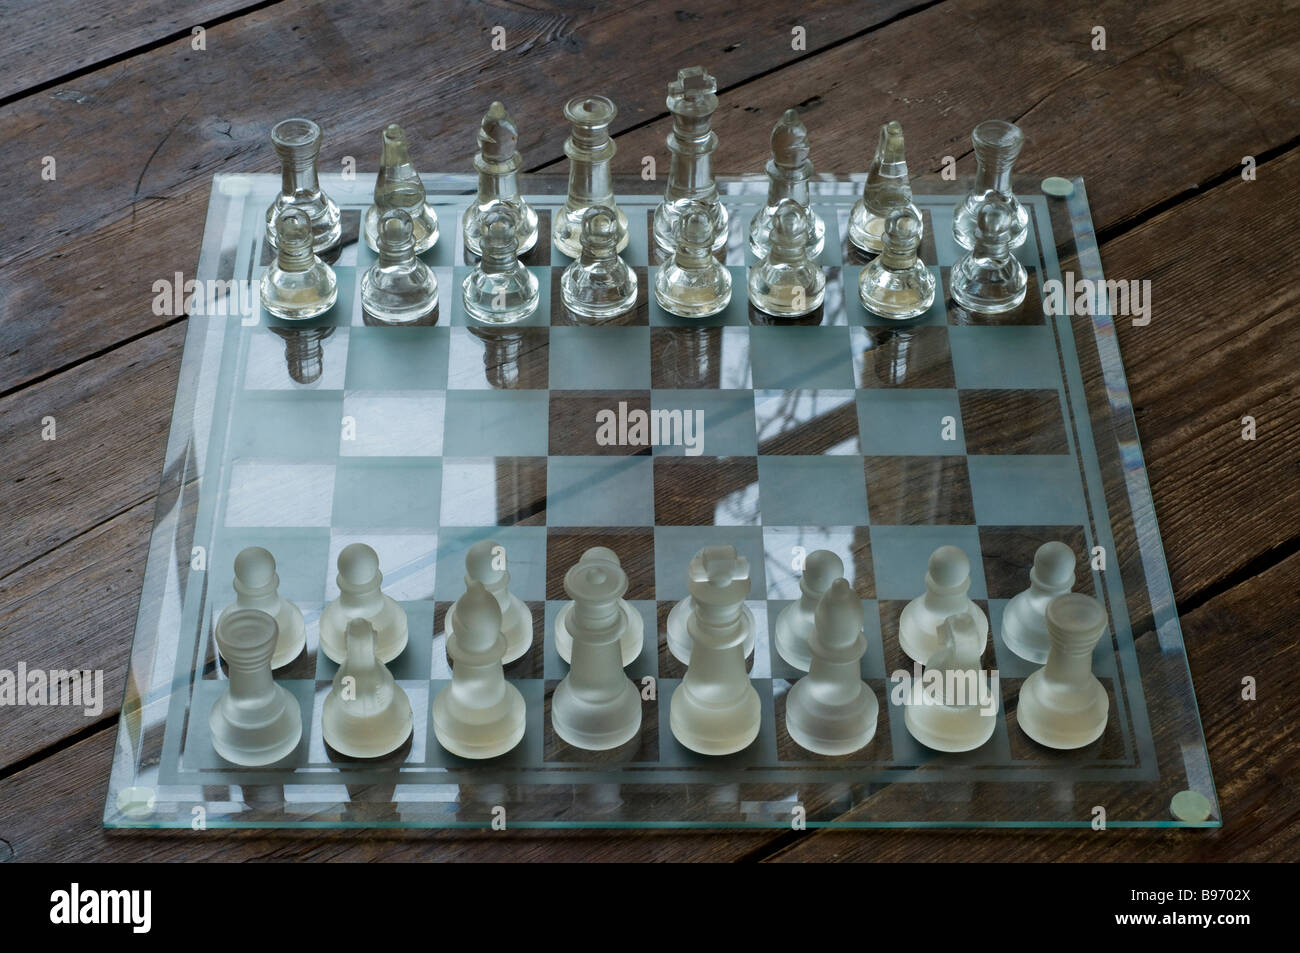 Glass chess set on a wooden floor Stock Photo